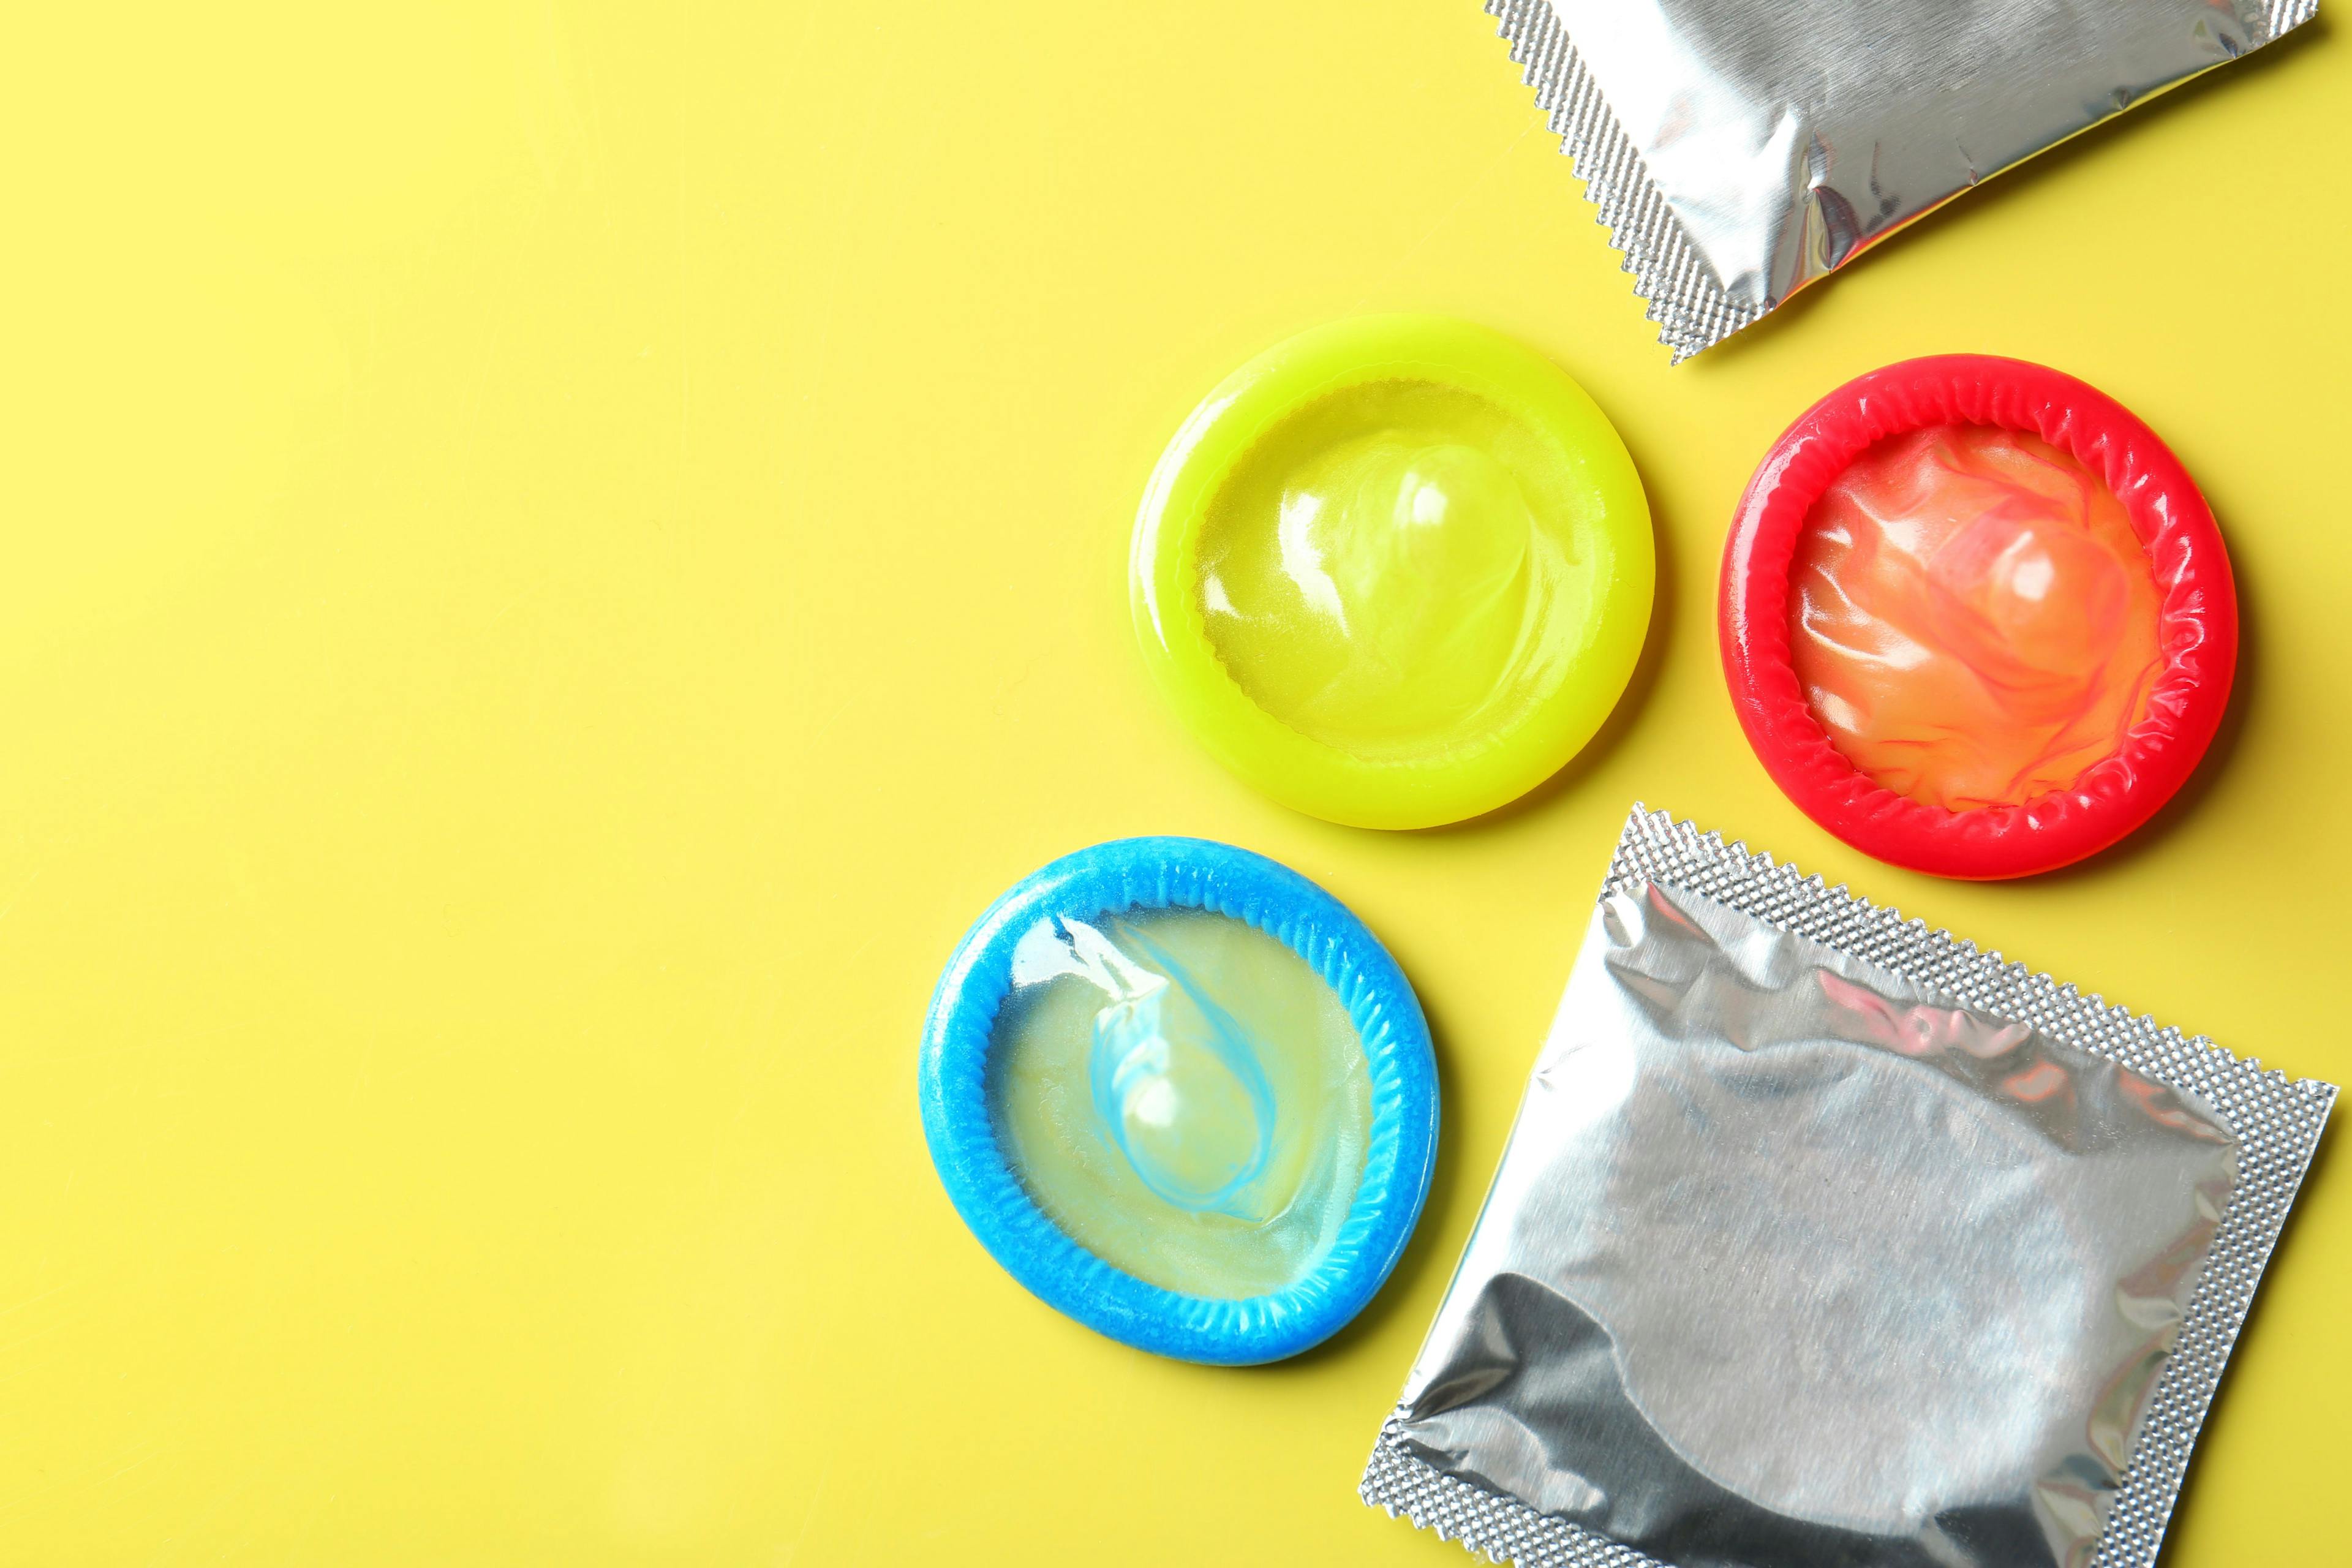 LARC users less likely to use condoms